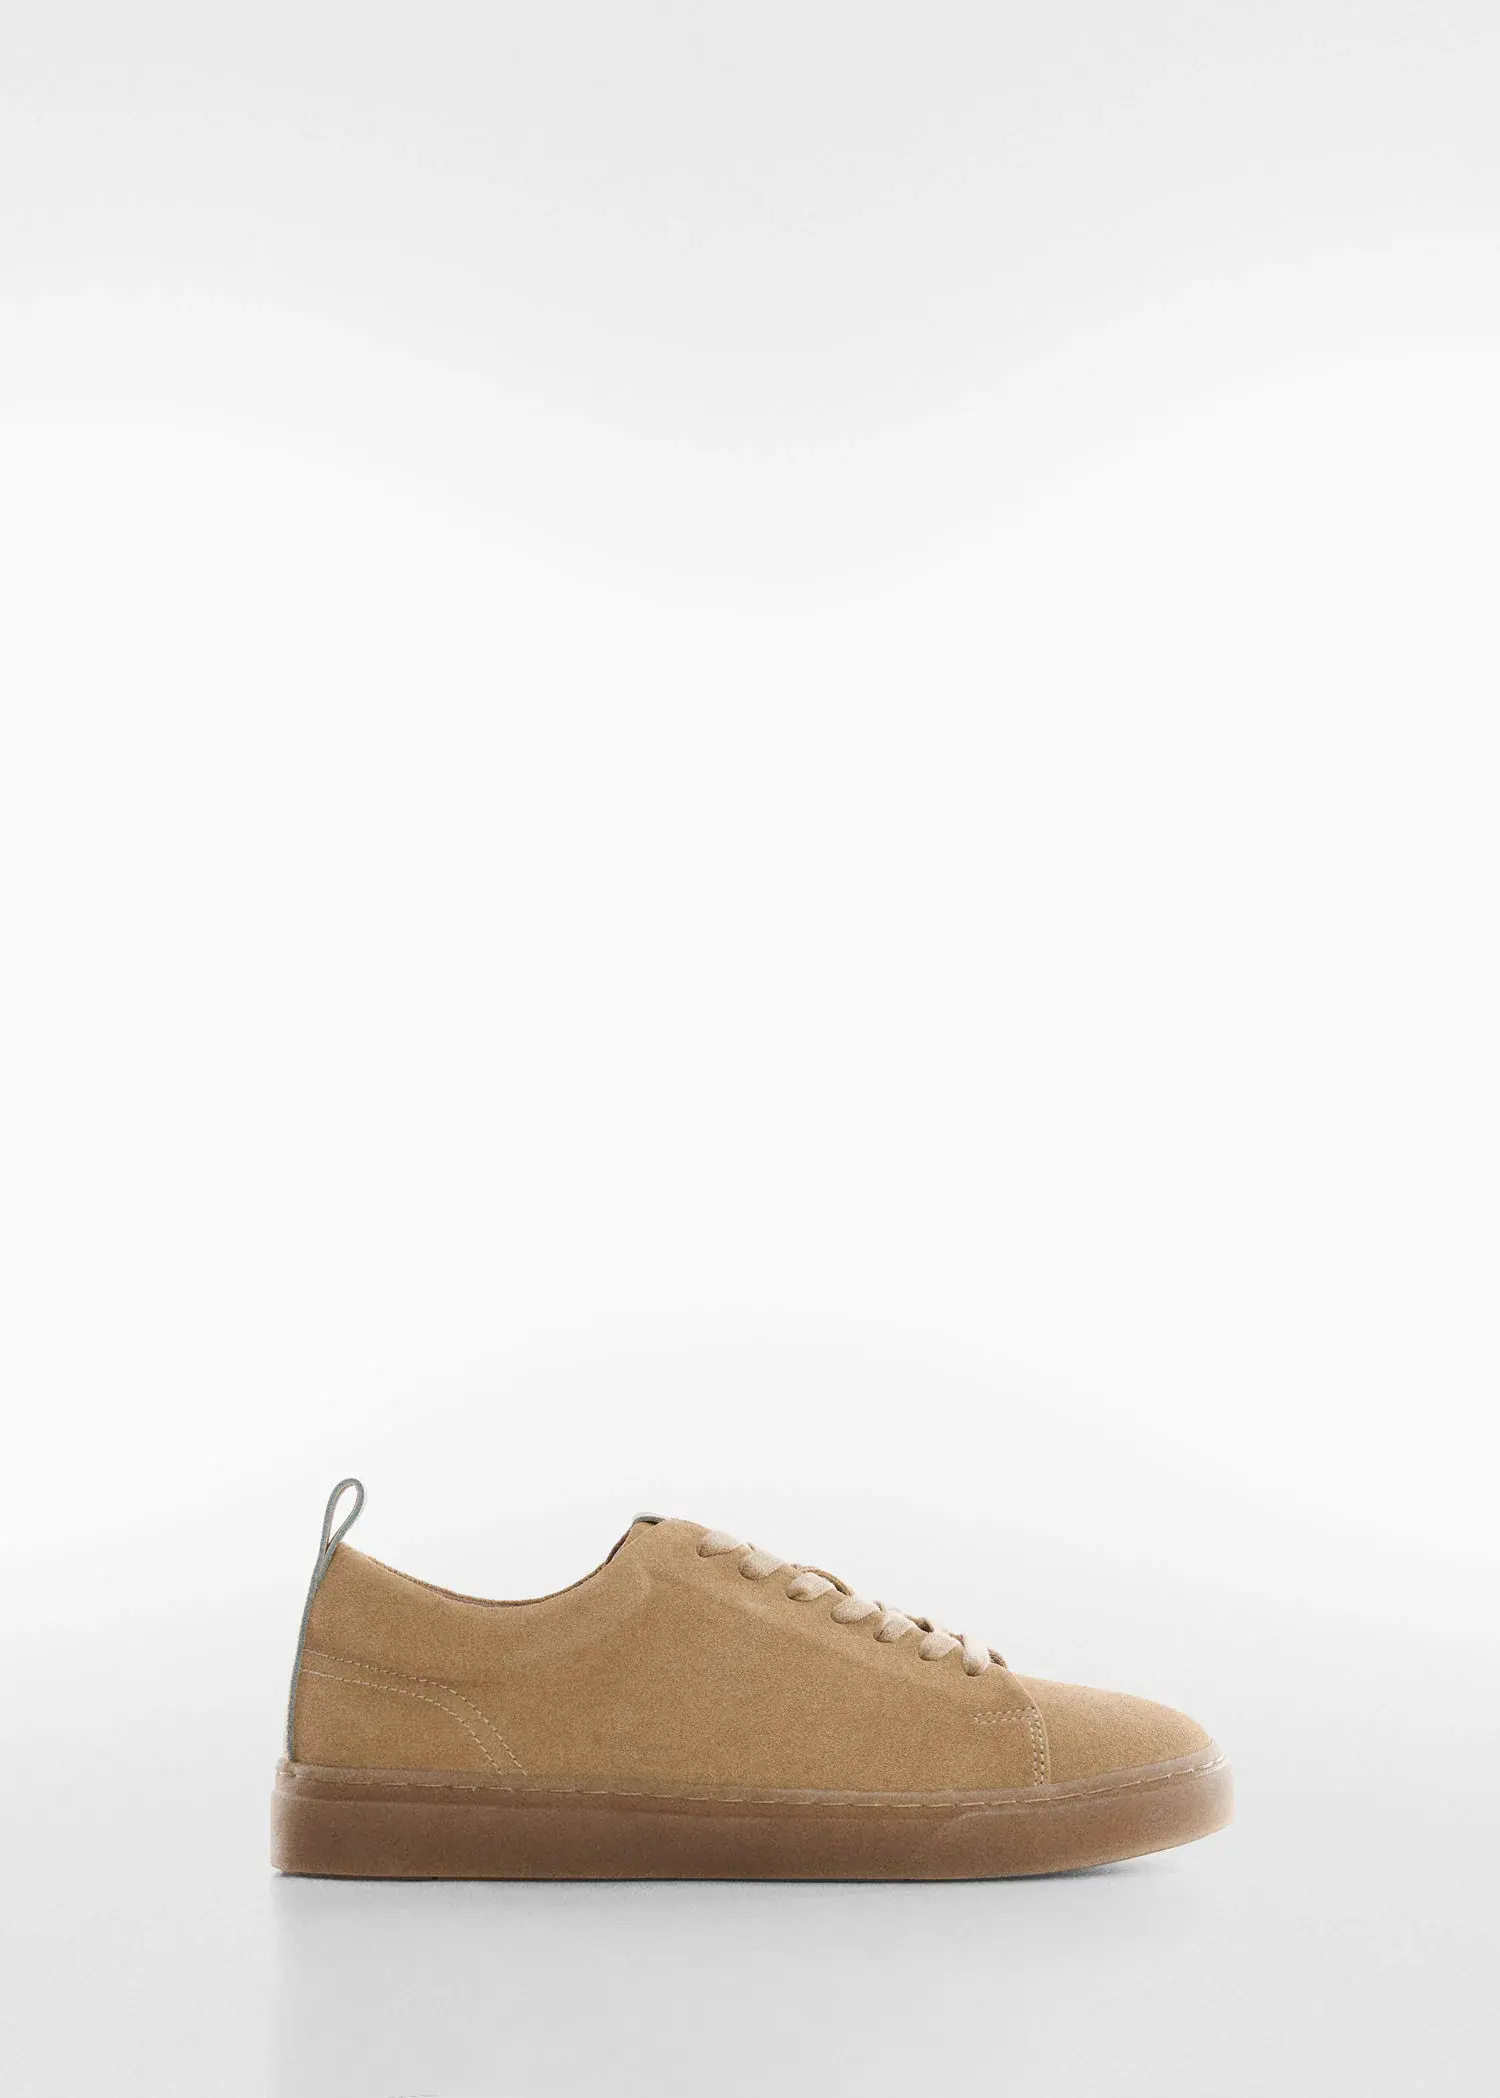 Mango Suede sneakers. a pair of shoes that are sitting on the ground. 